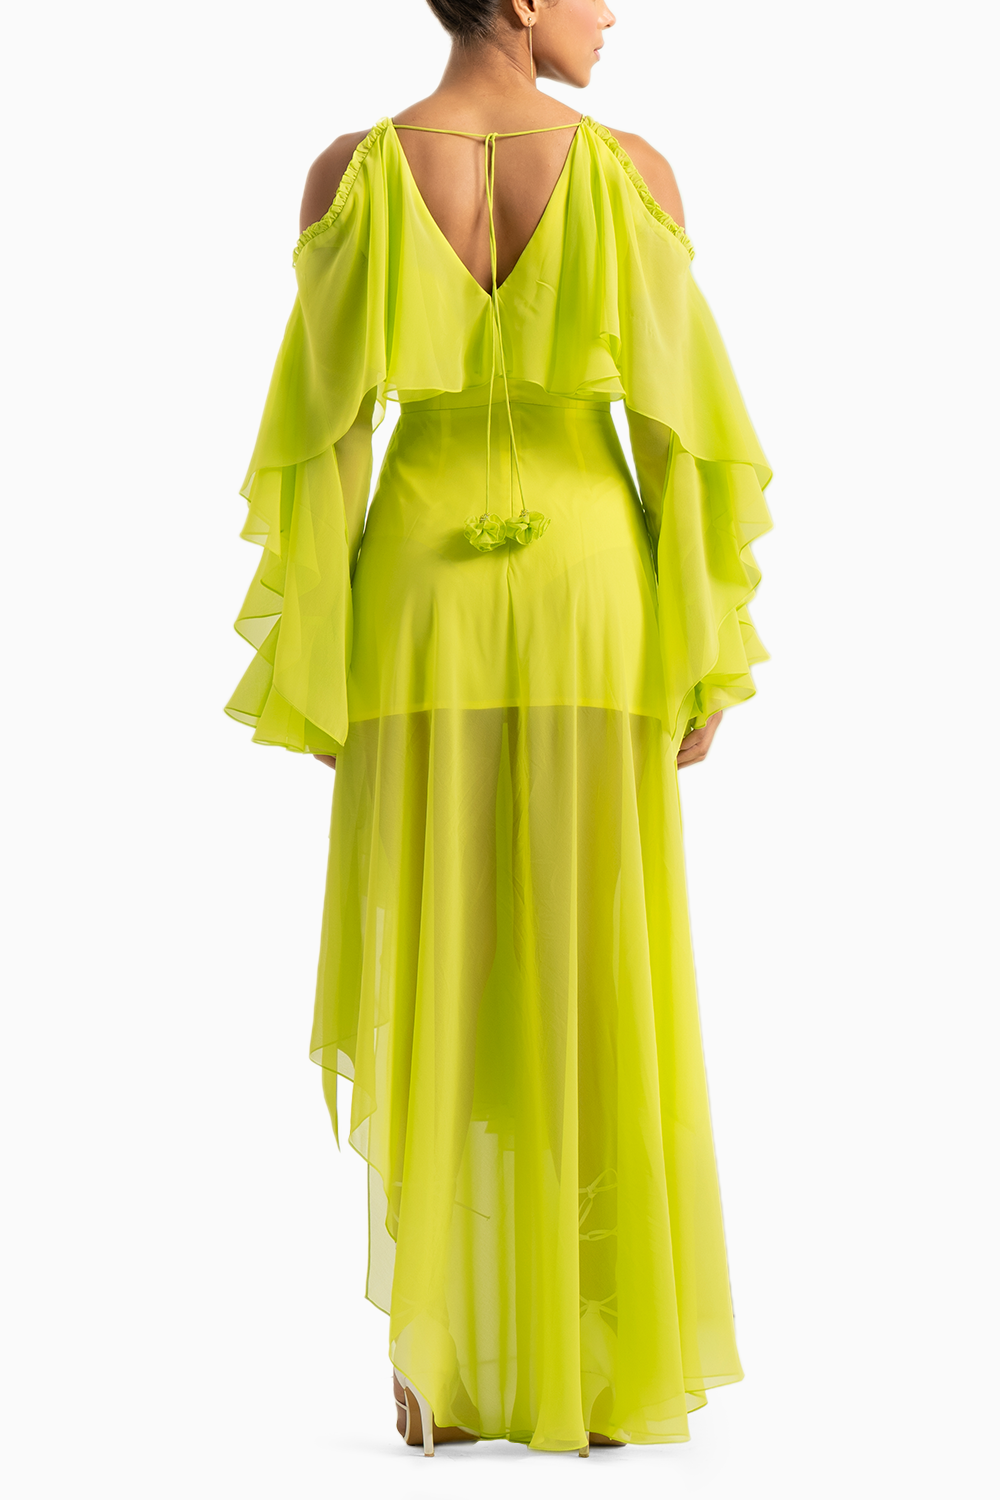 Lime Green Asymentric Dress